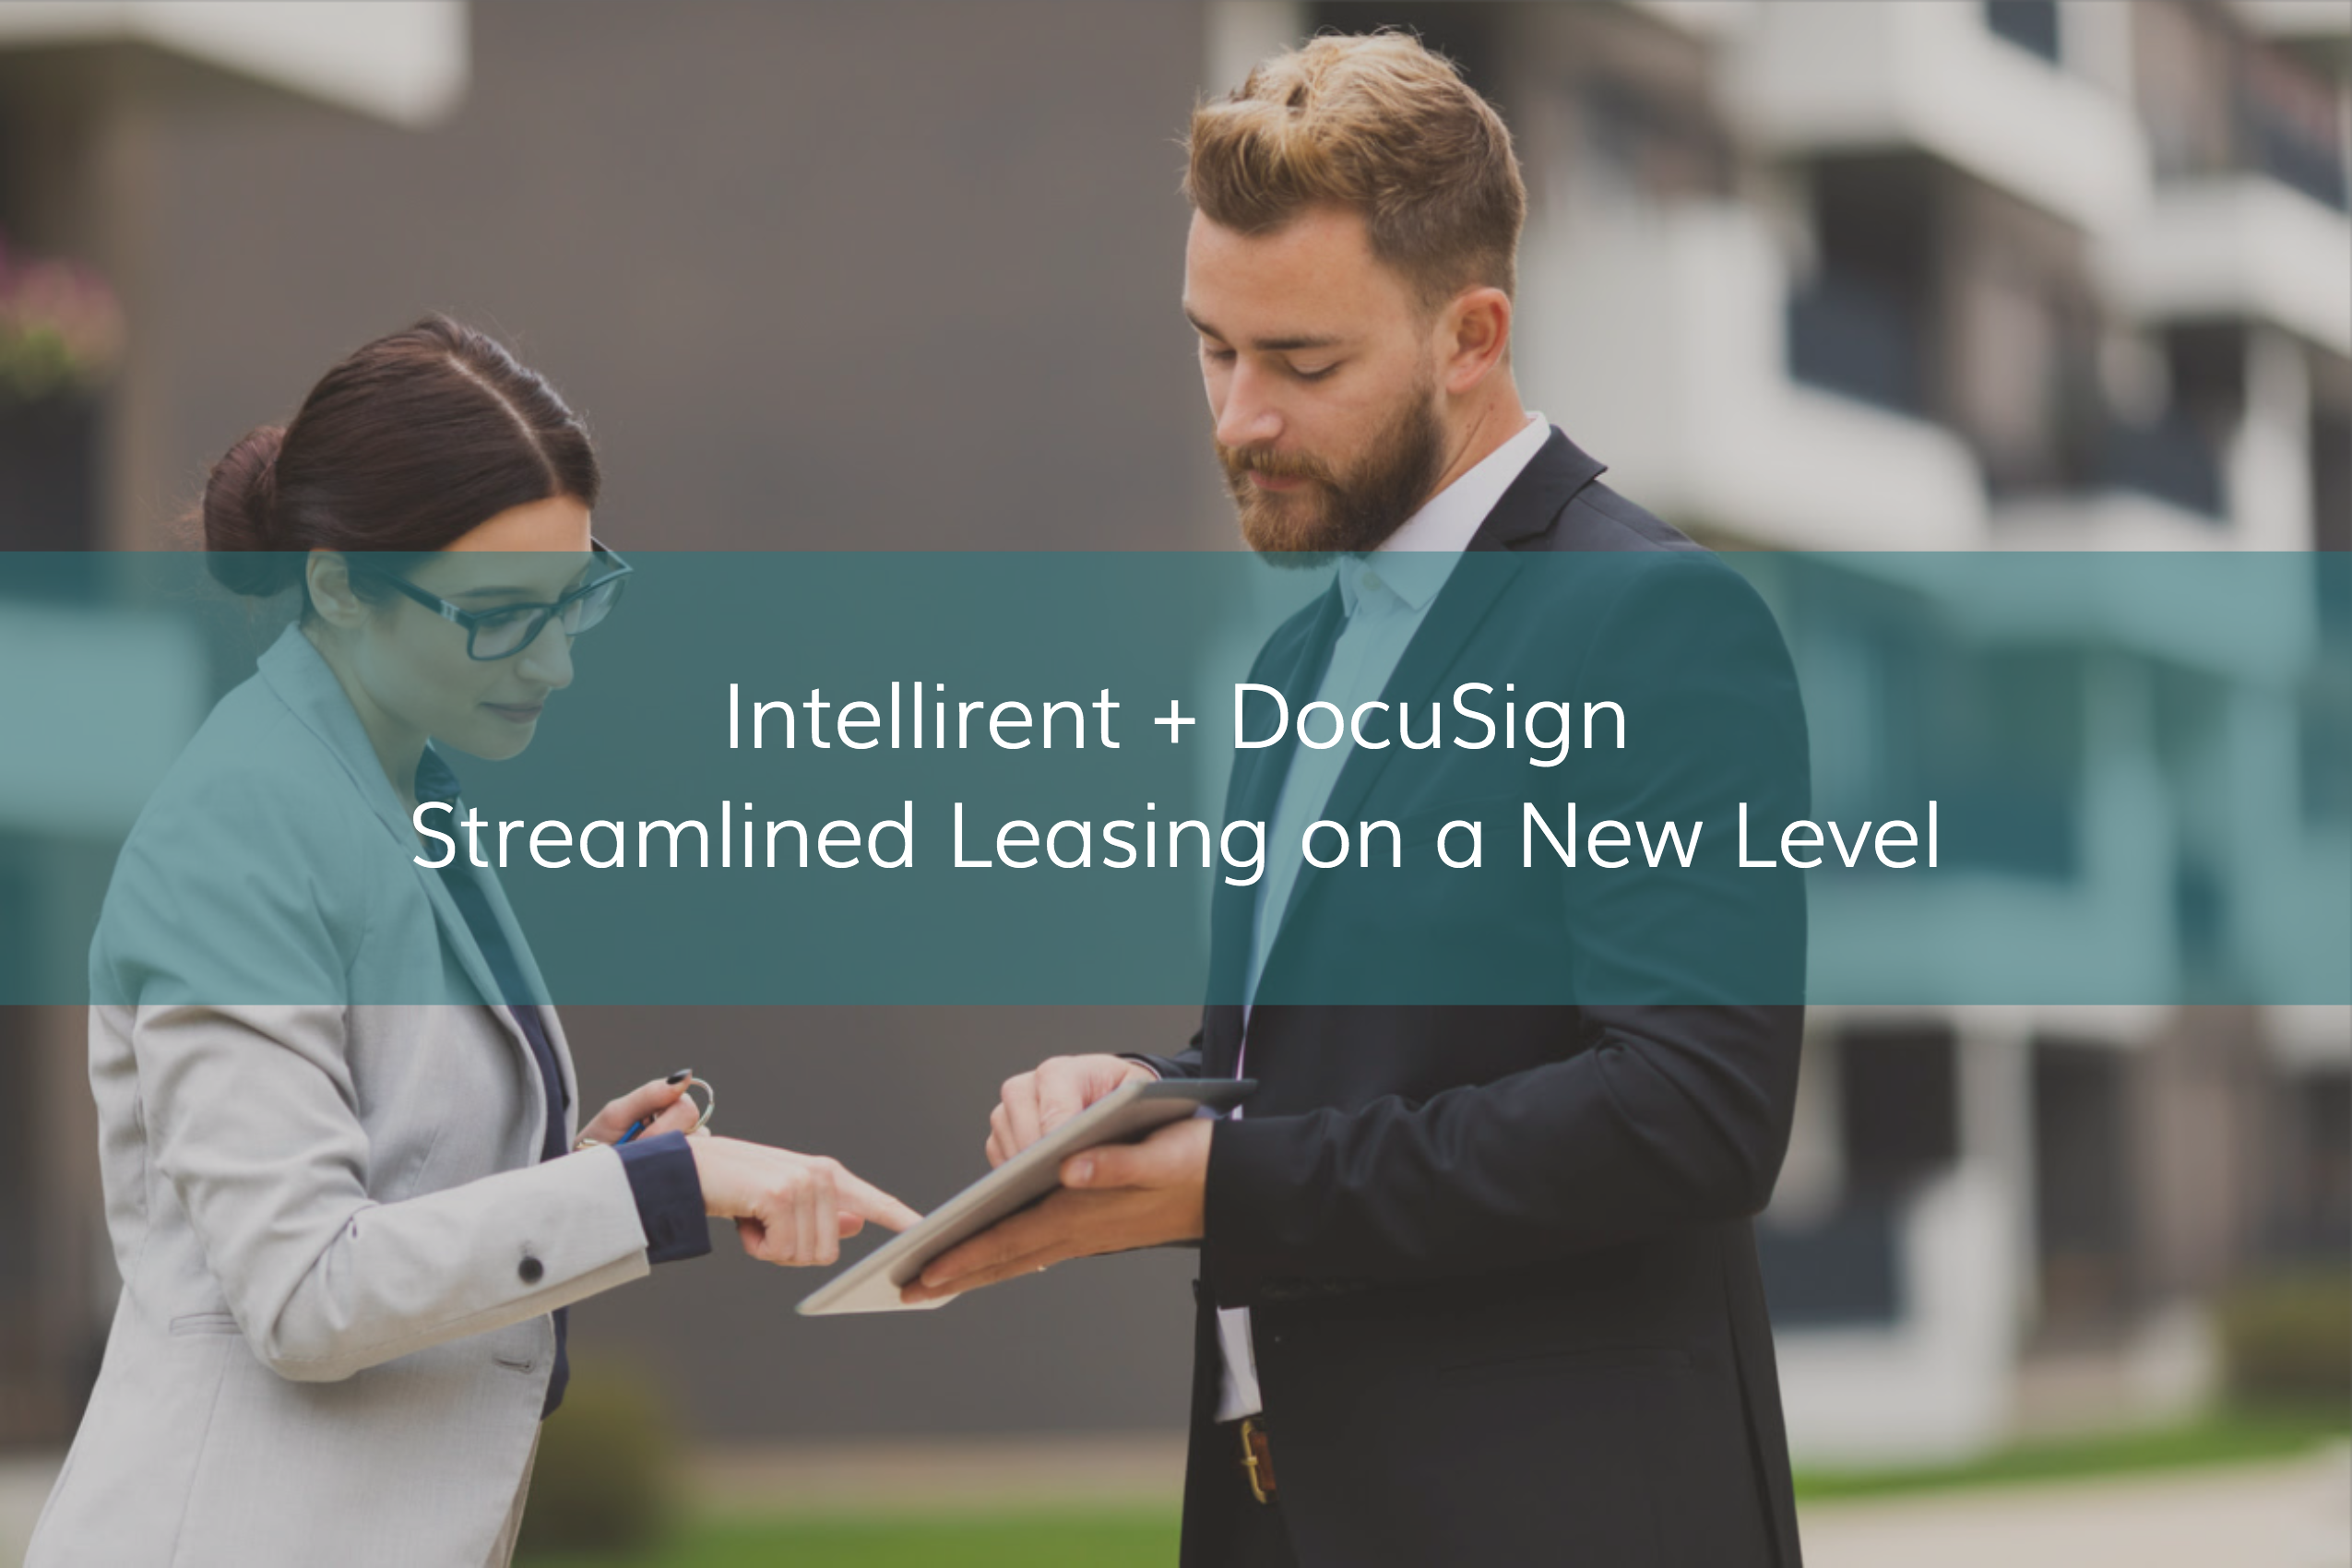 ANNOUNCEMENT: Intellirent partners with DocuSign